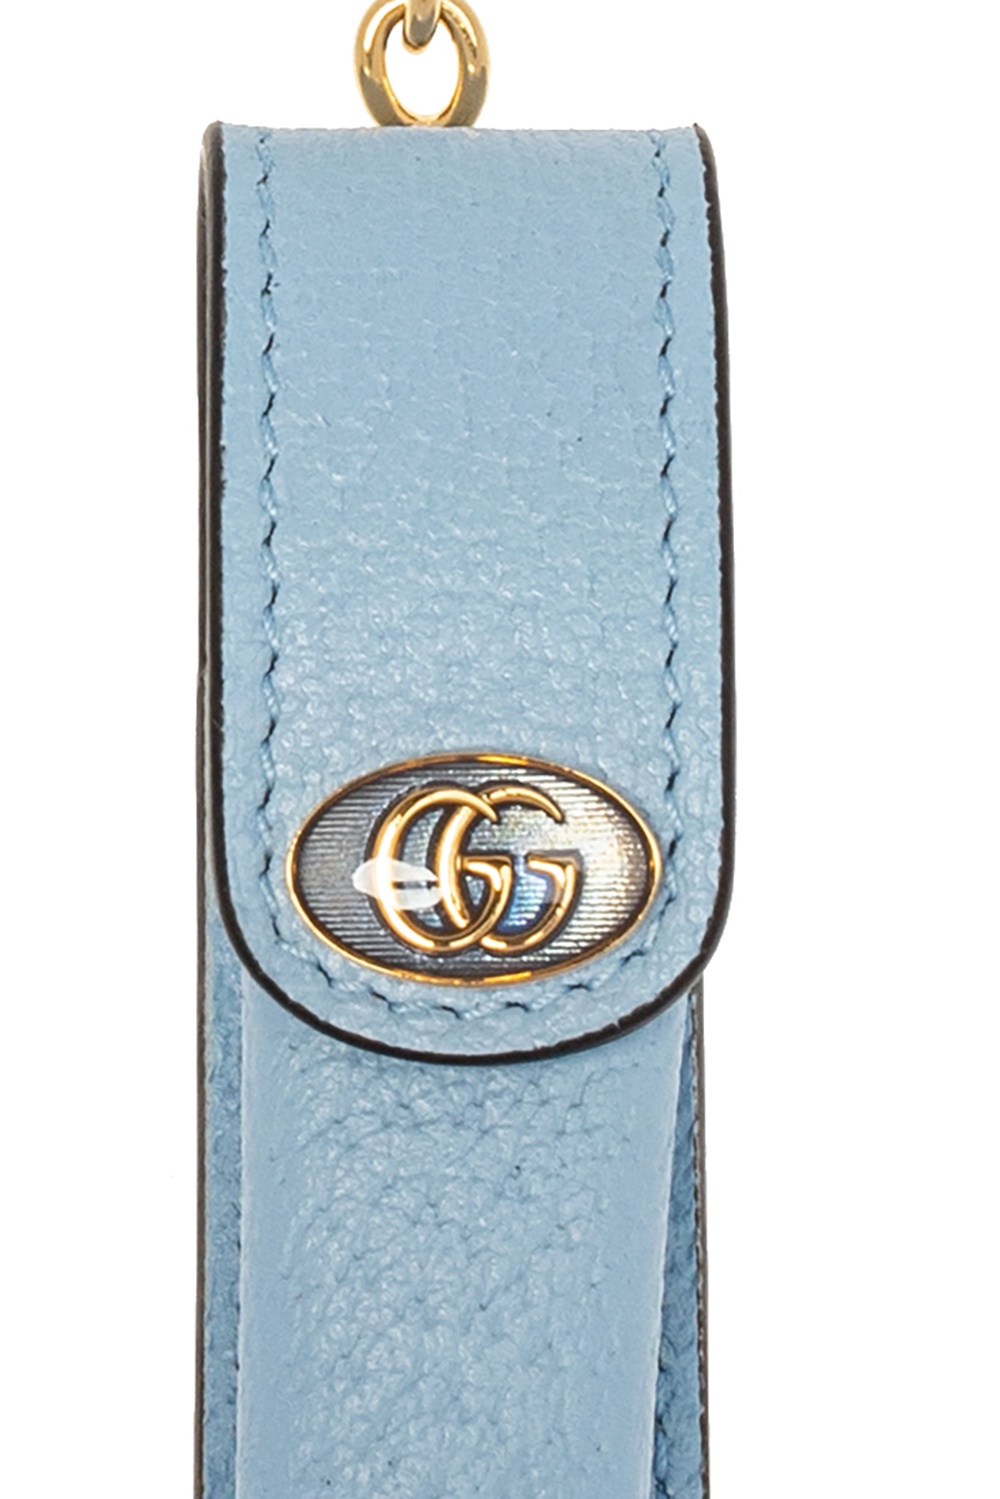 Replying to @BLUE yes! its's the #gucci marmont leather key case